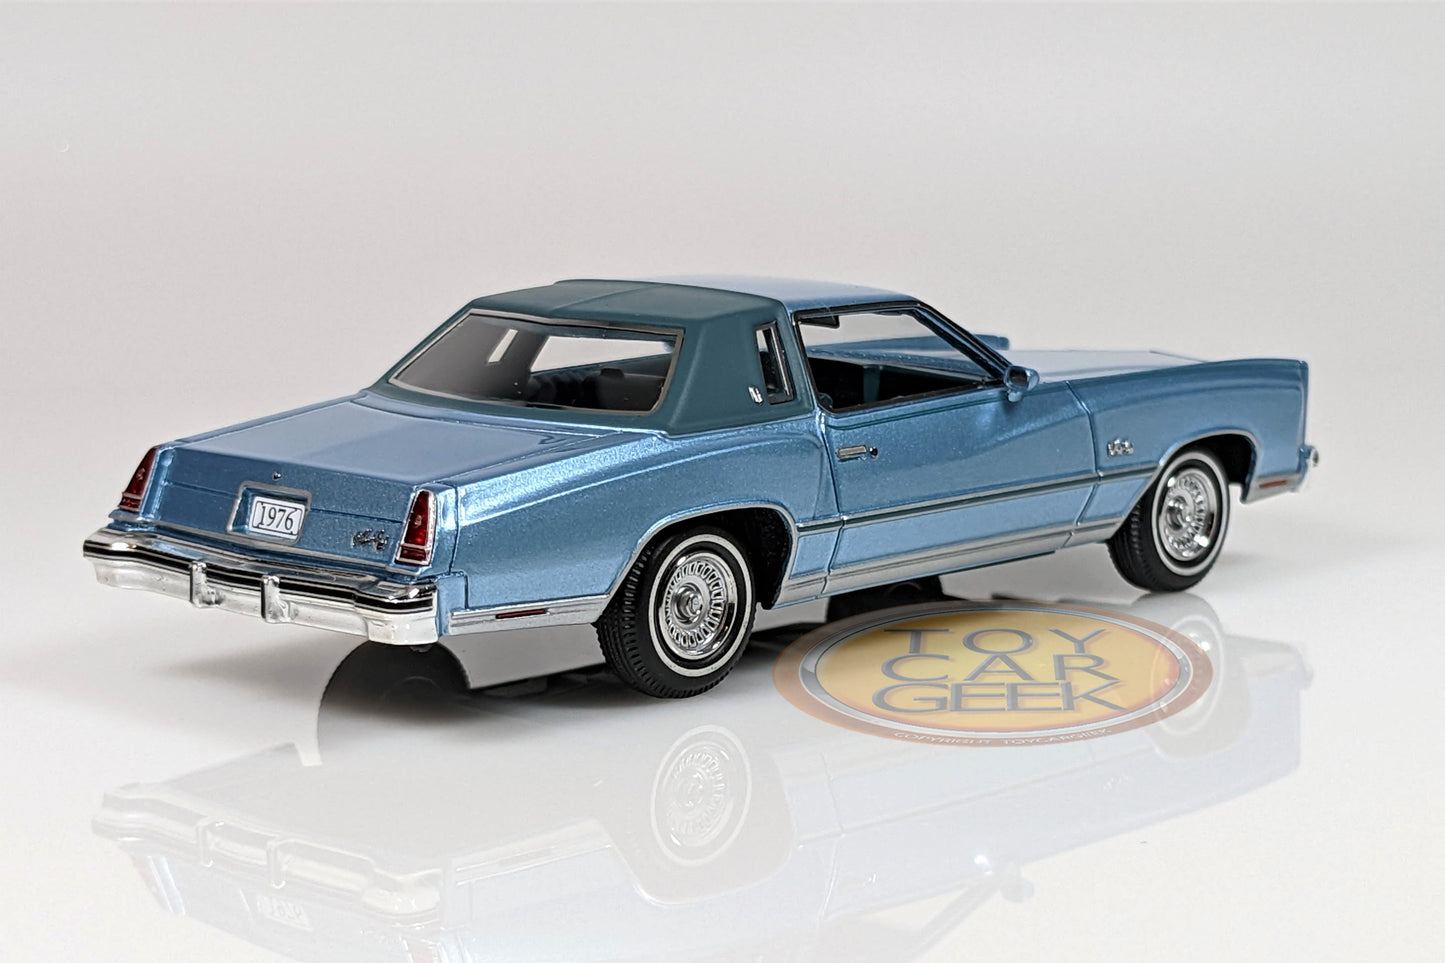 1976 Chevrolet Monte Carlo - RESERVED